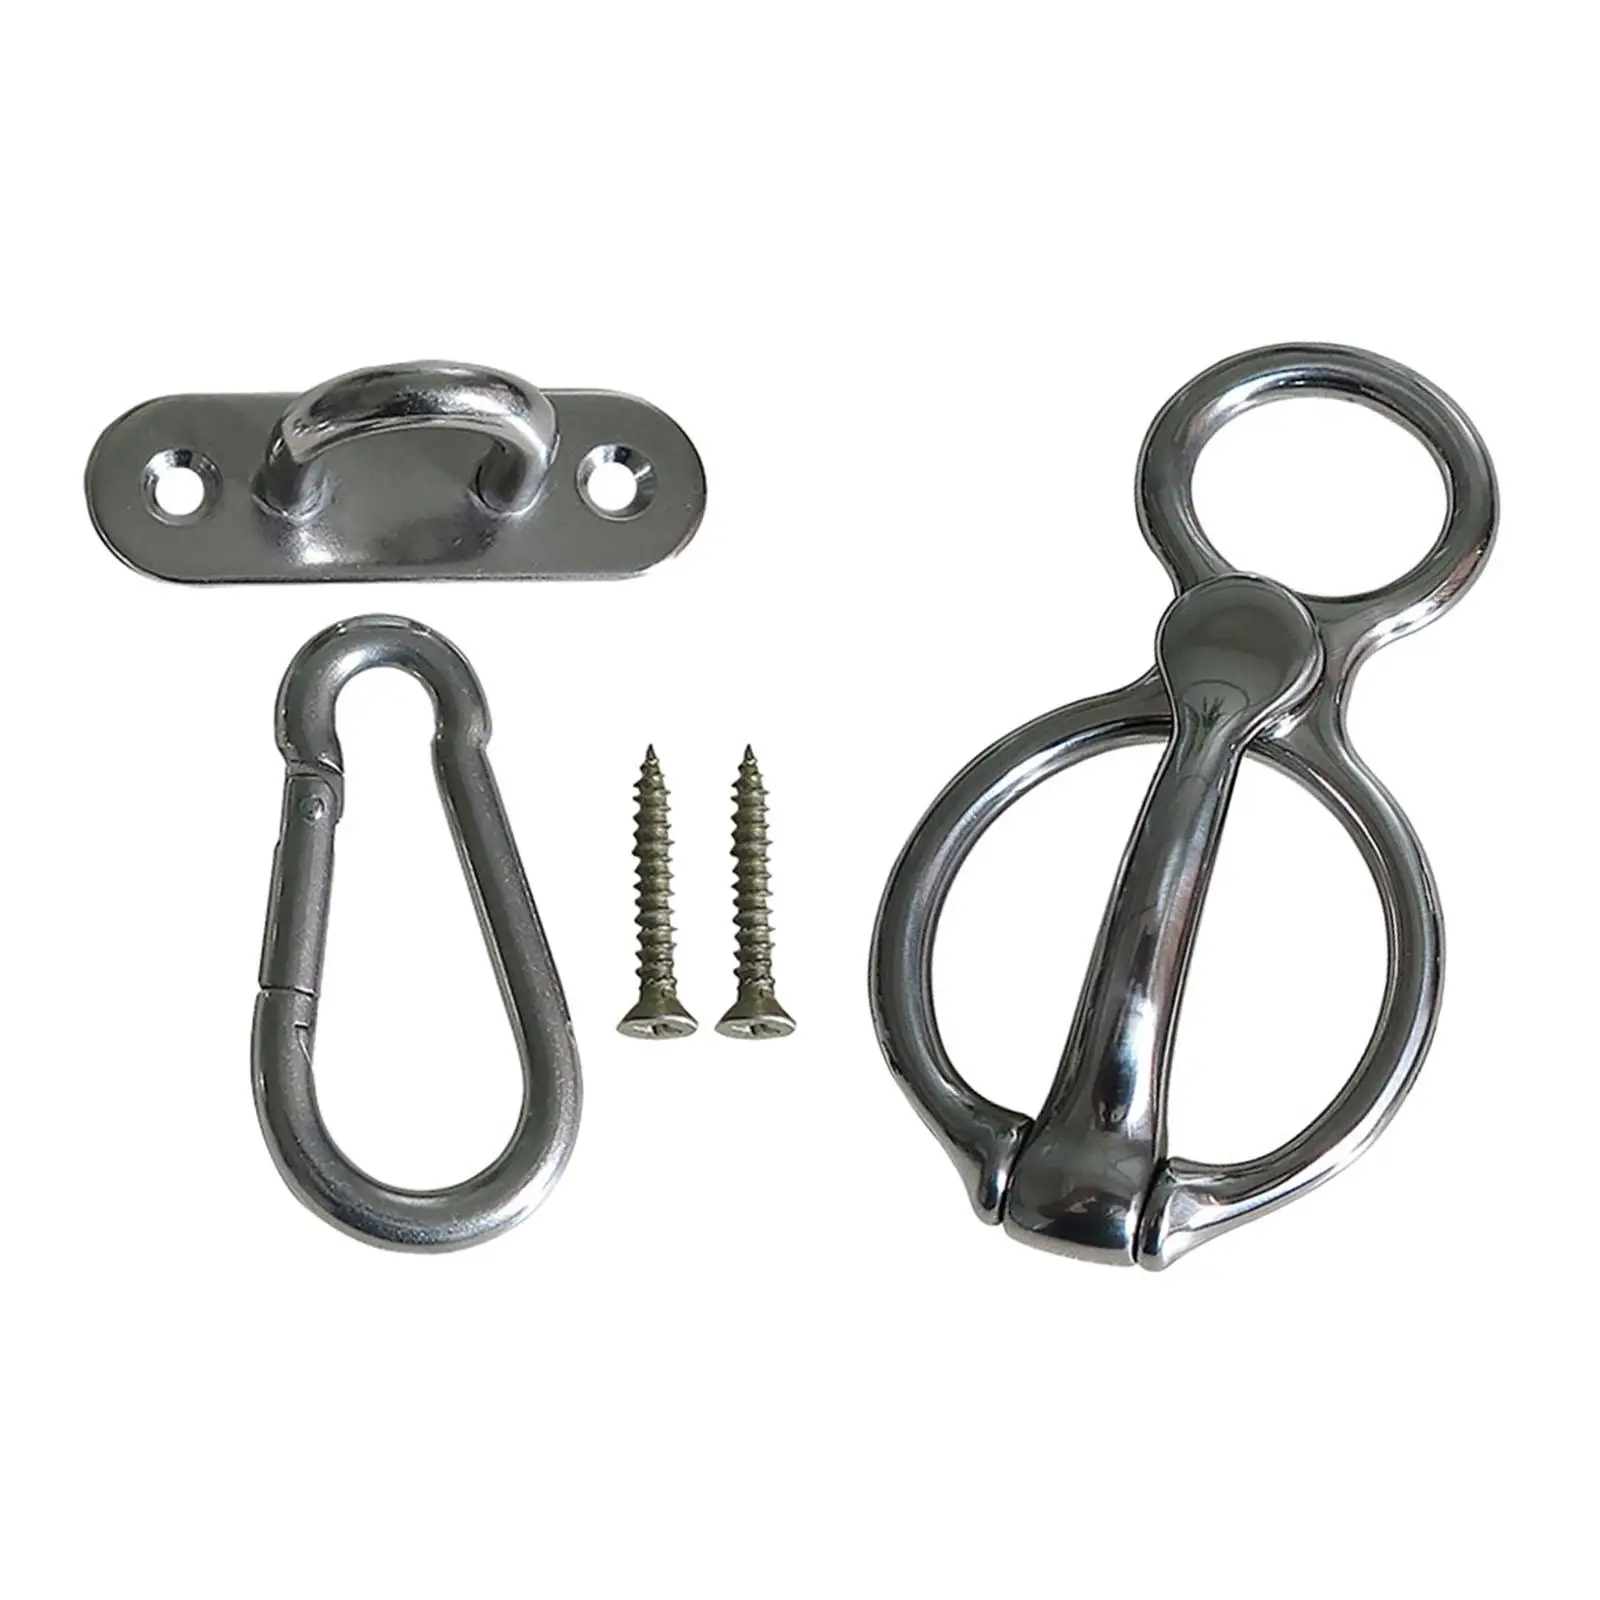 Horse Tie Ring with Eye Bolt Durable Prevent Horses from Pulling Back Fasteners Livestock Tie Off Quick Snap Safety Accessories